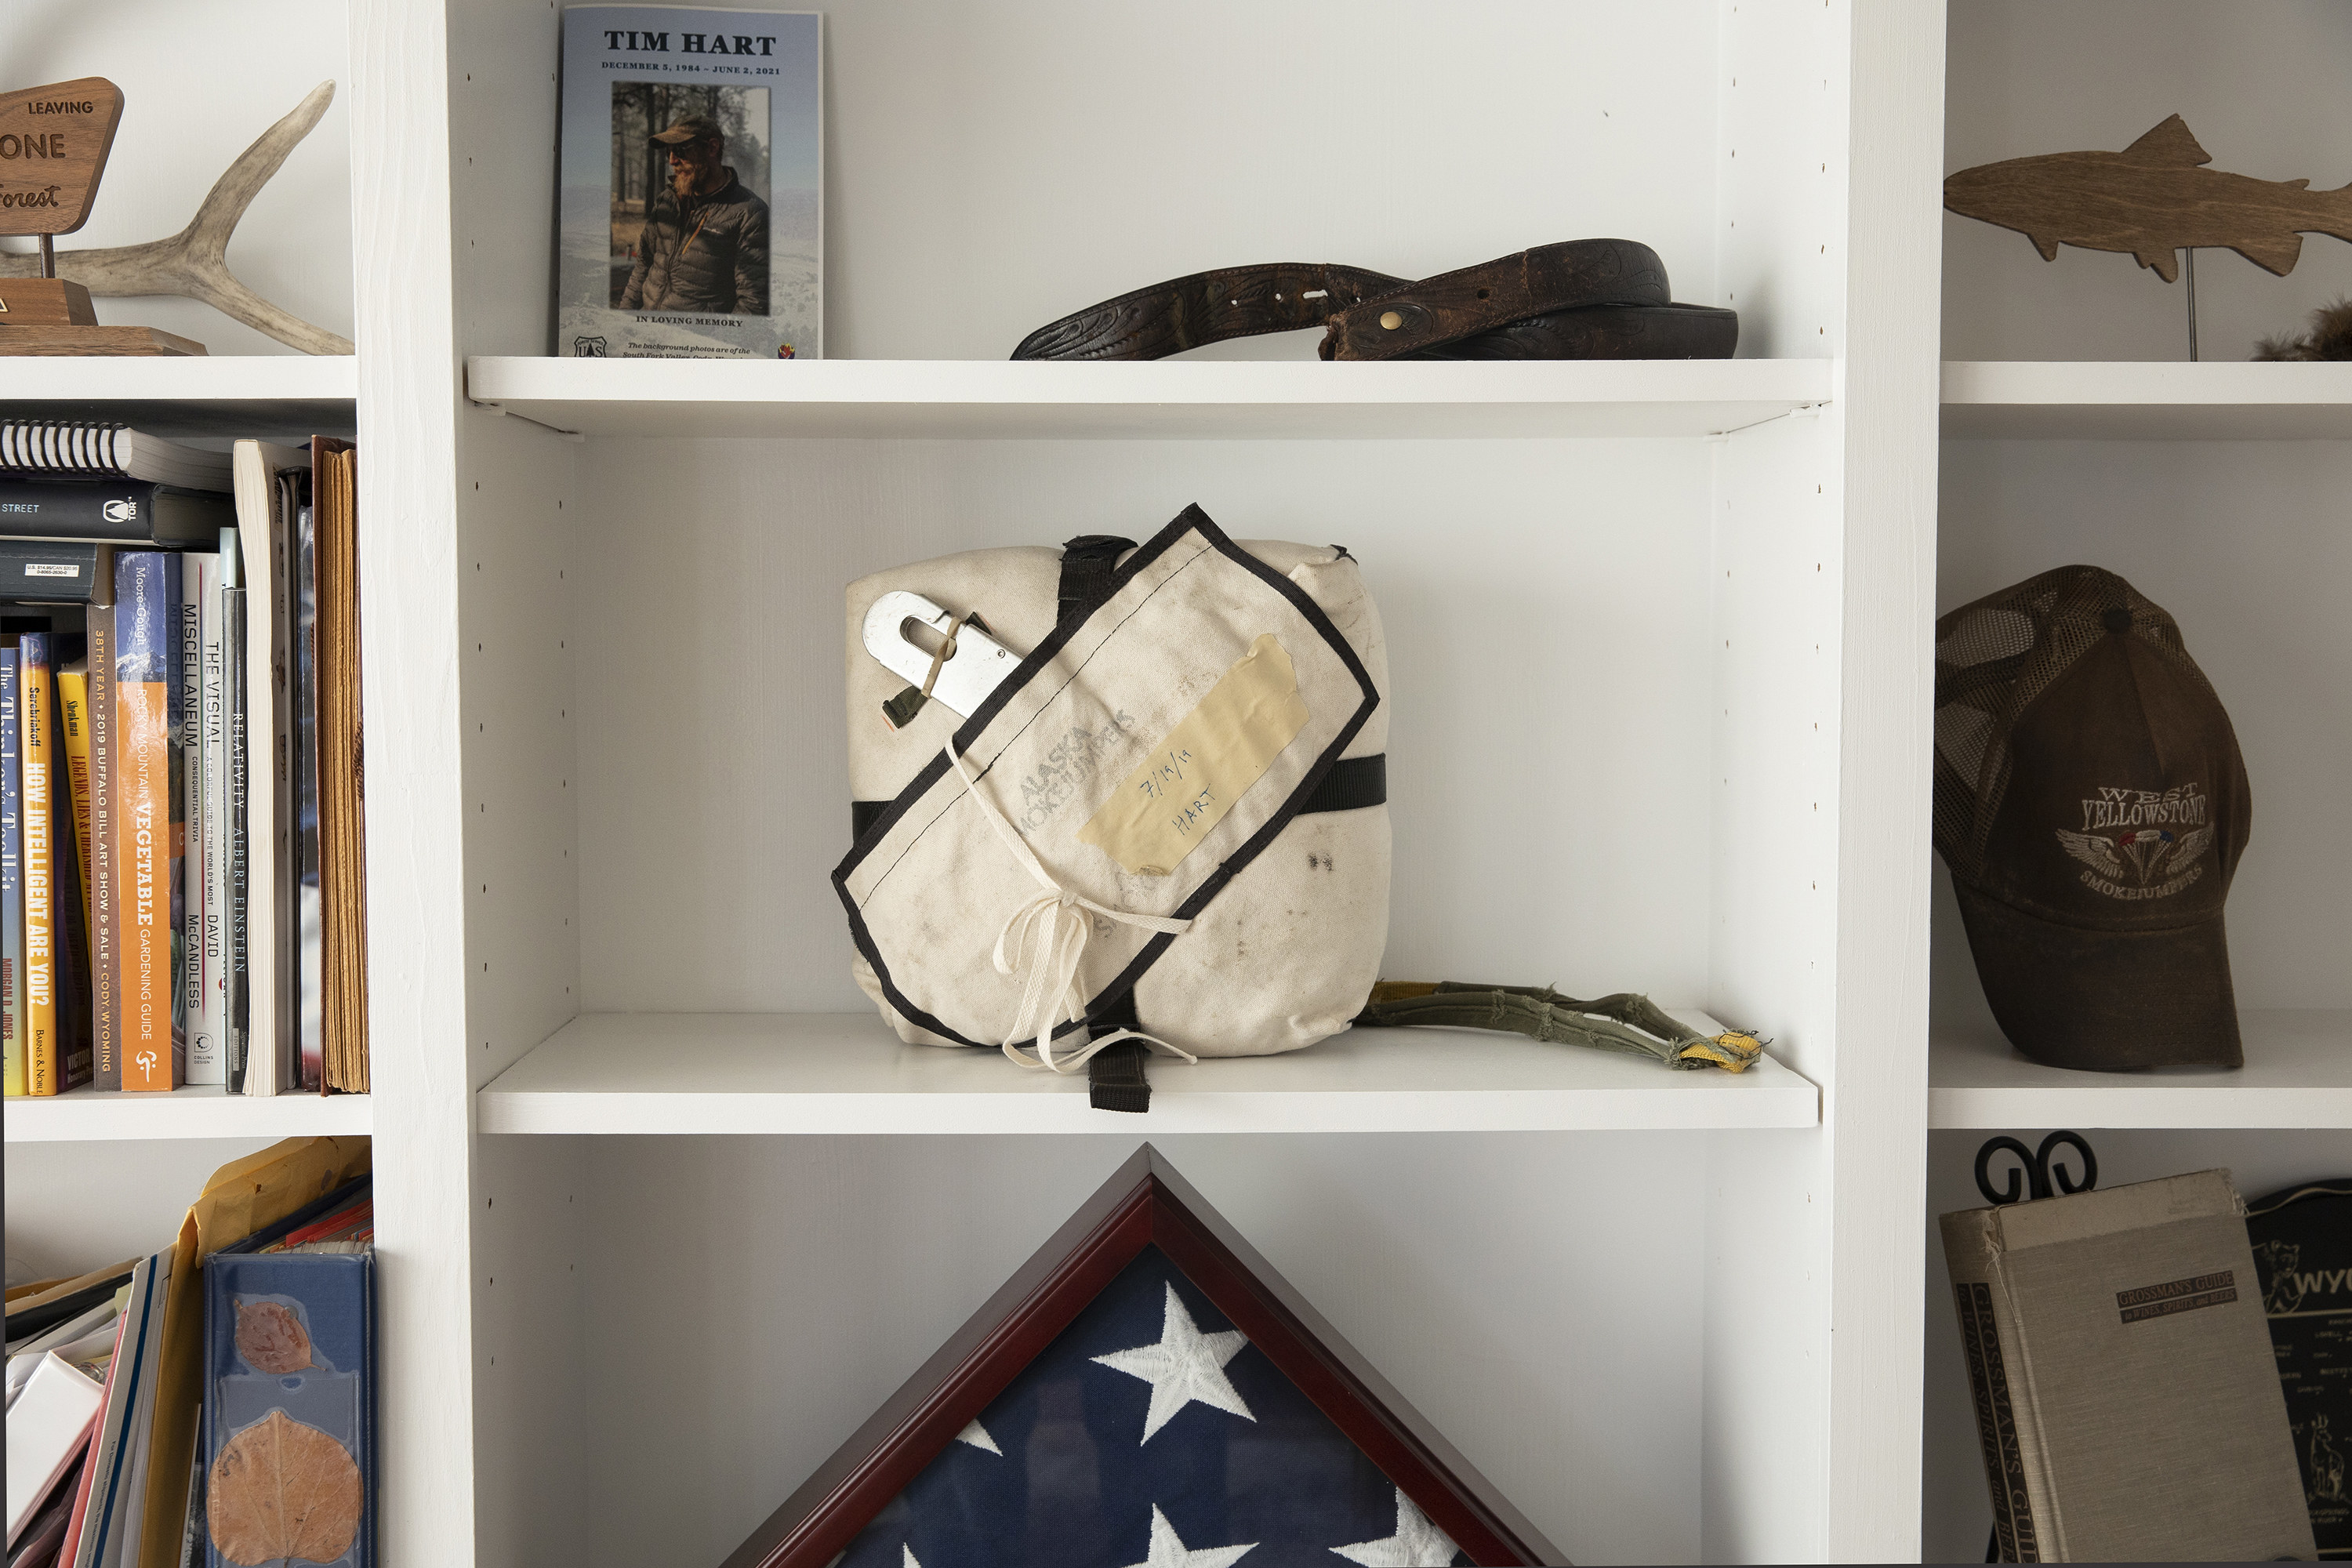 A bookcase holds a pamphlet for tim hart, his parachute, and an american flag